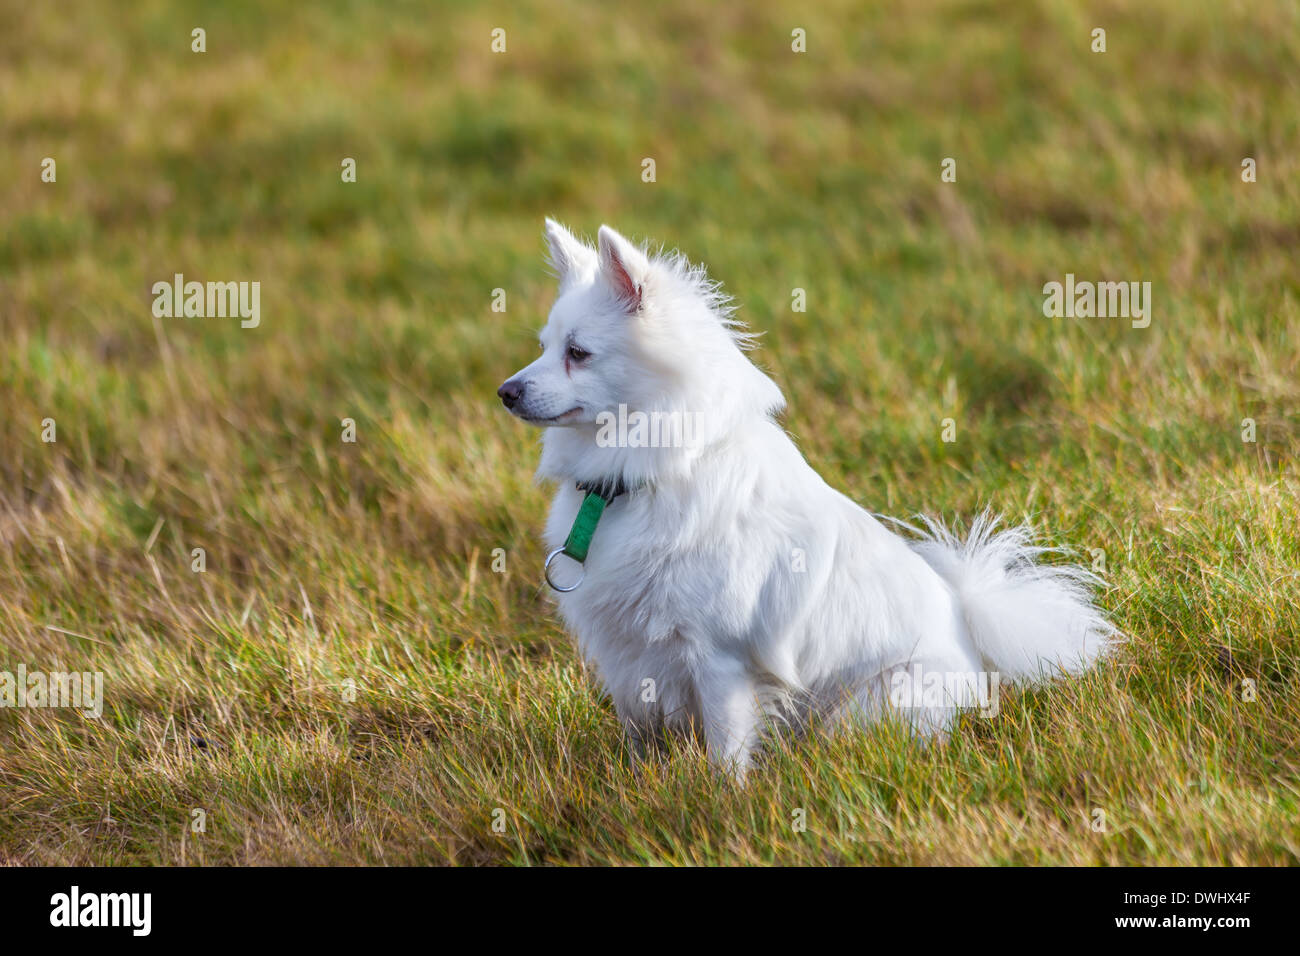 Blanc chien Pomeranian sitting on grass field Banque D'Images